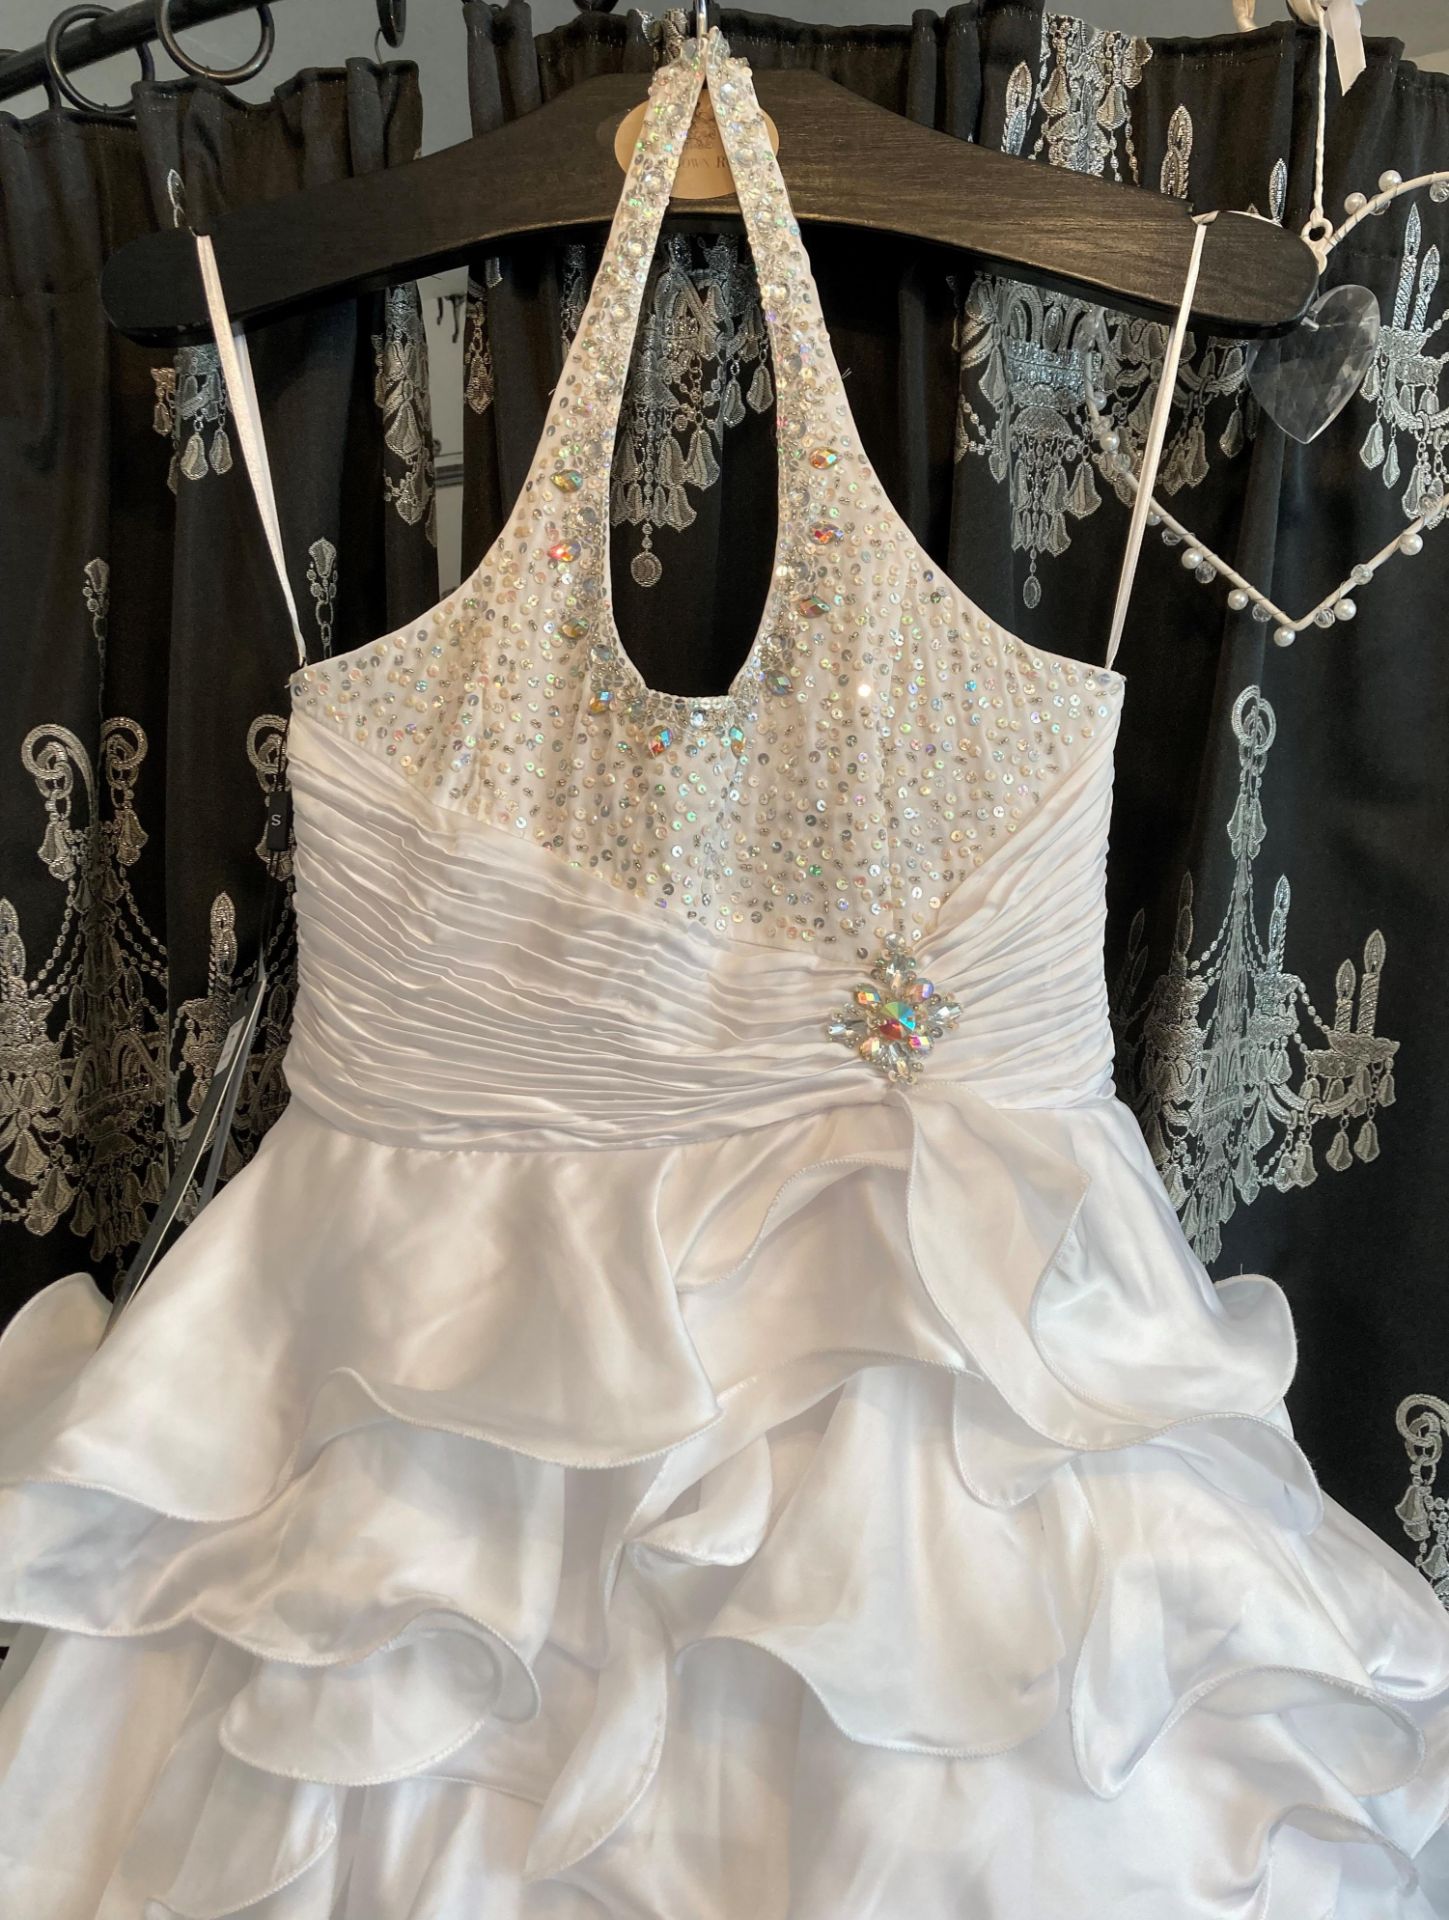 Children's white pageant gown, age 12. - Image 2 of 4